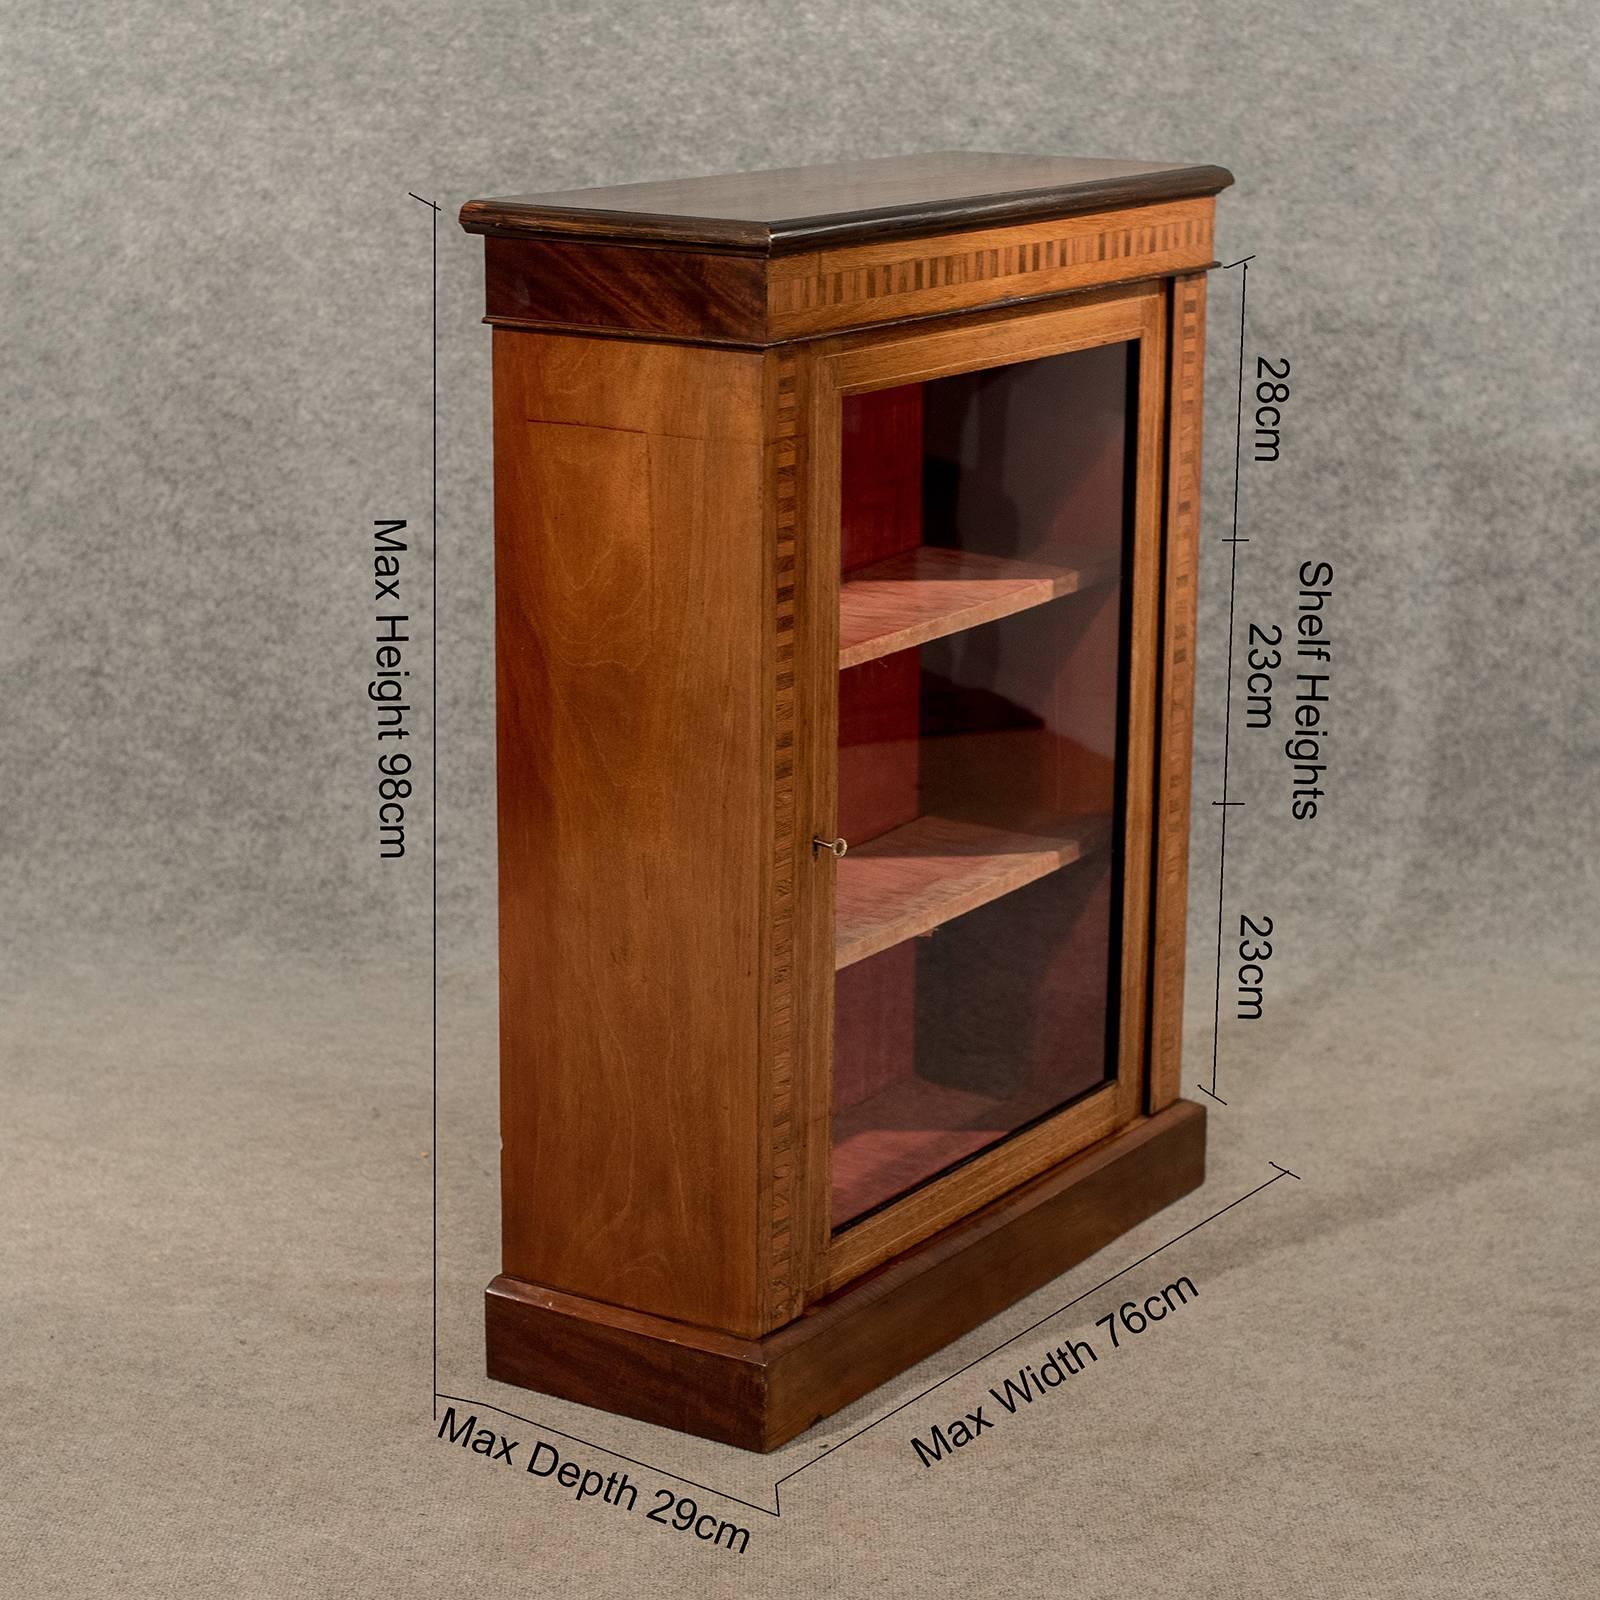 A pleasing original Victorian display pier cabinet presented in very good antique condition
With desirable inlaid marquetry to the perimeter of the central door
Original interior lining showing marks consistent with age
Locks untested as correct